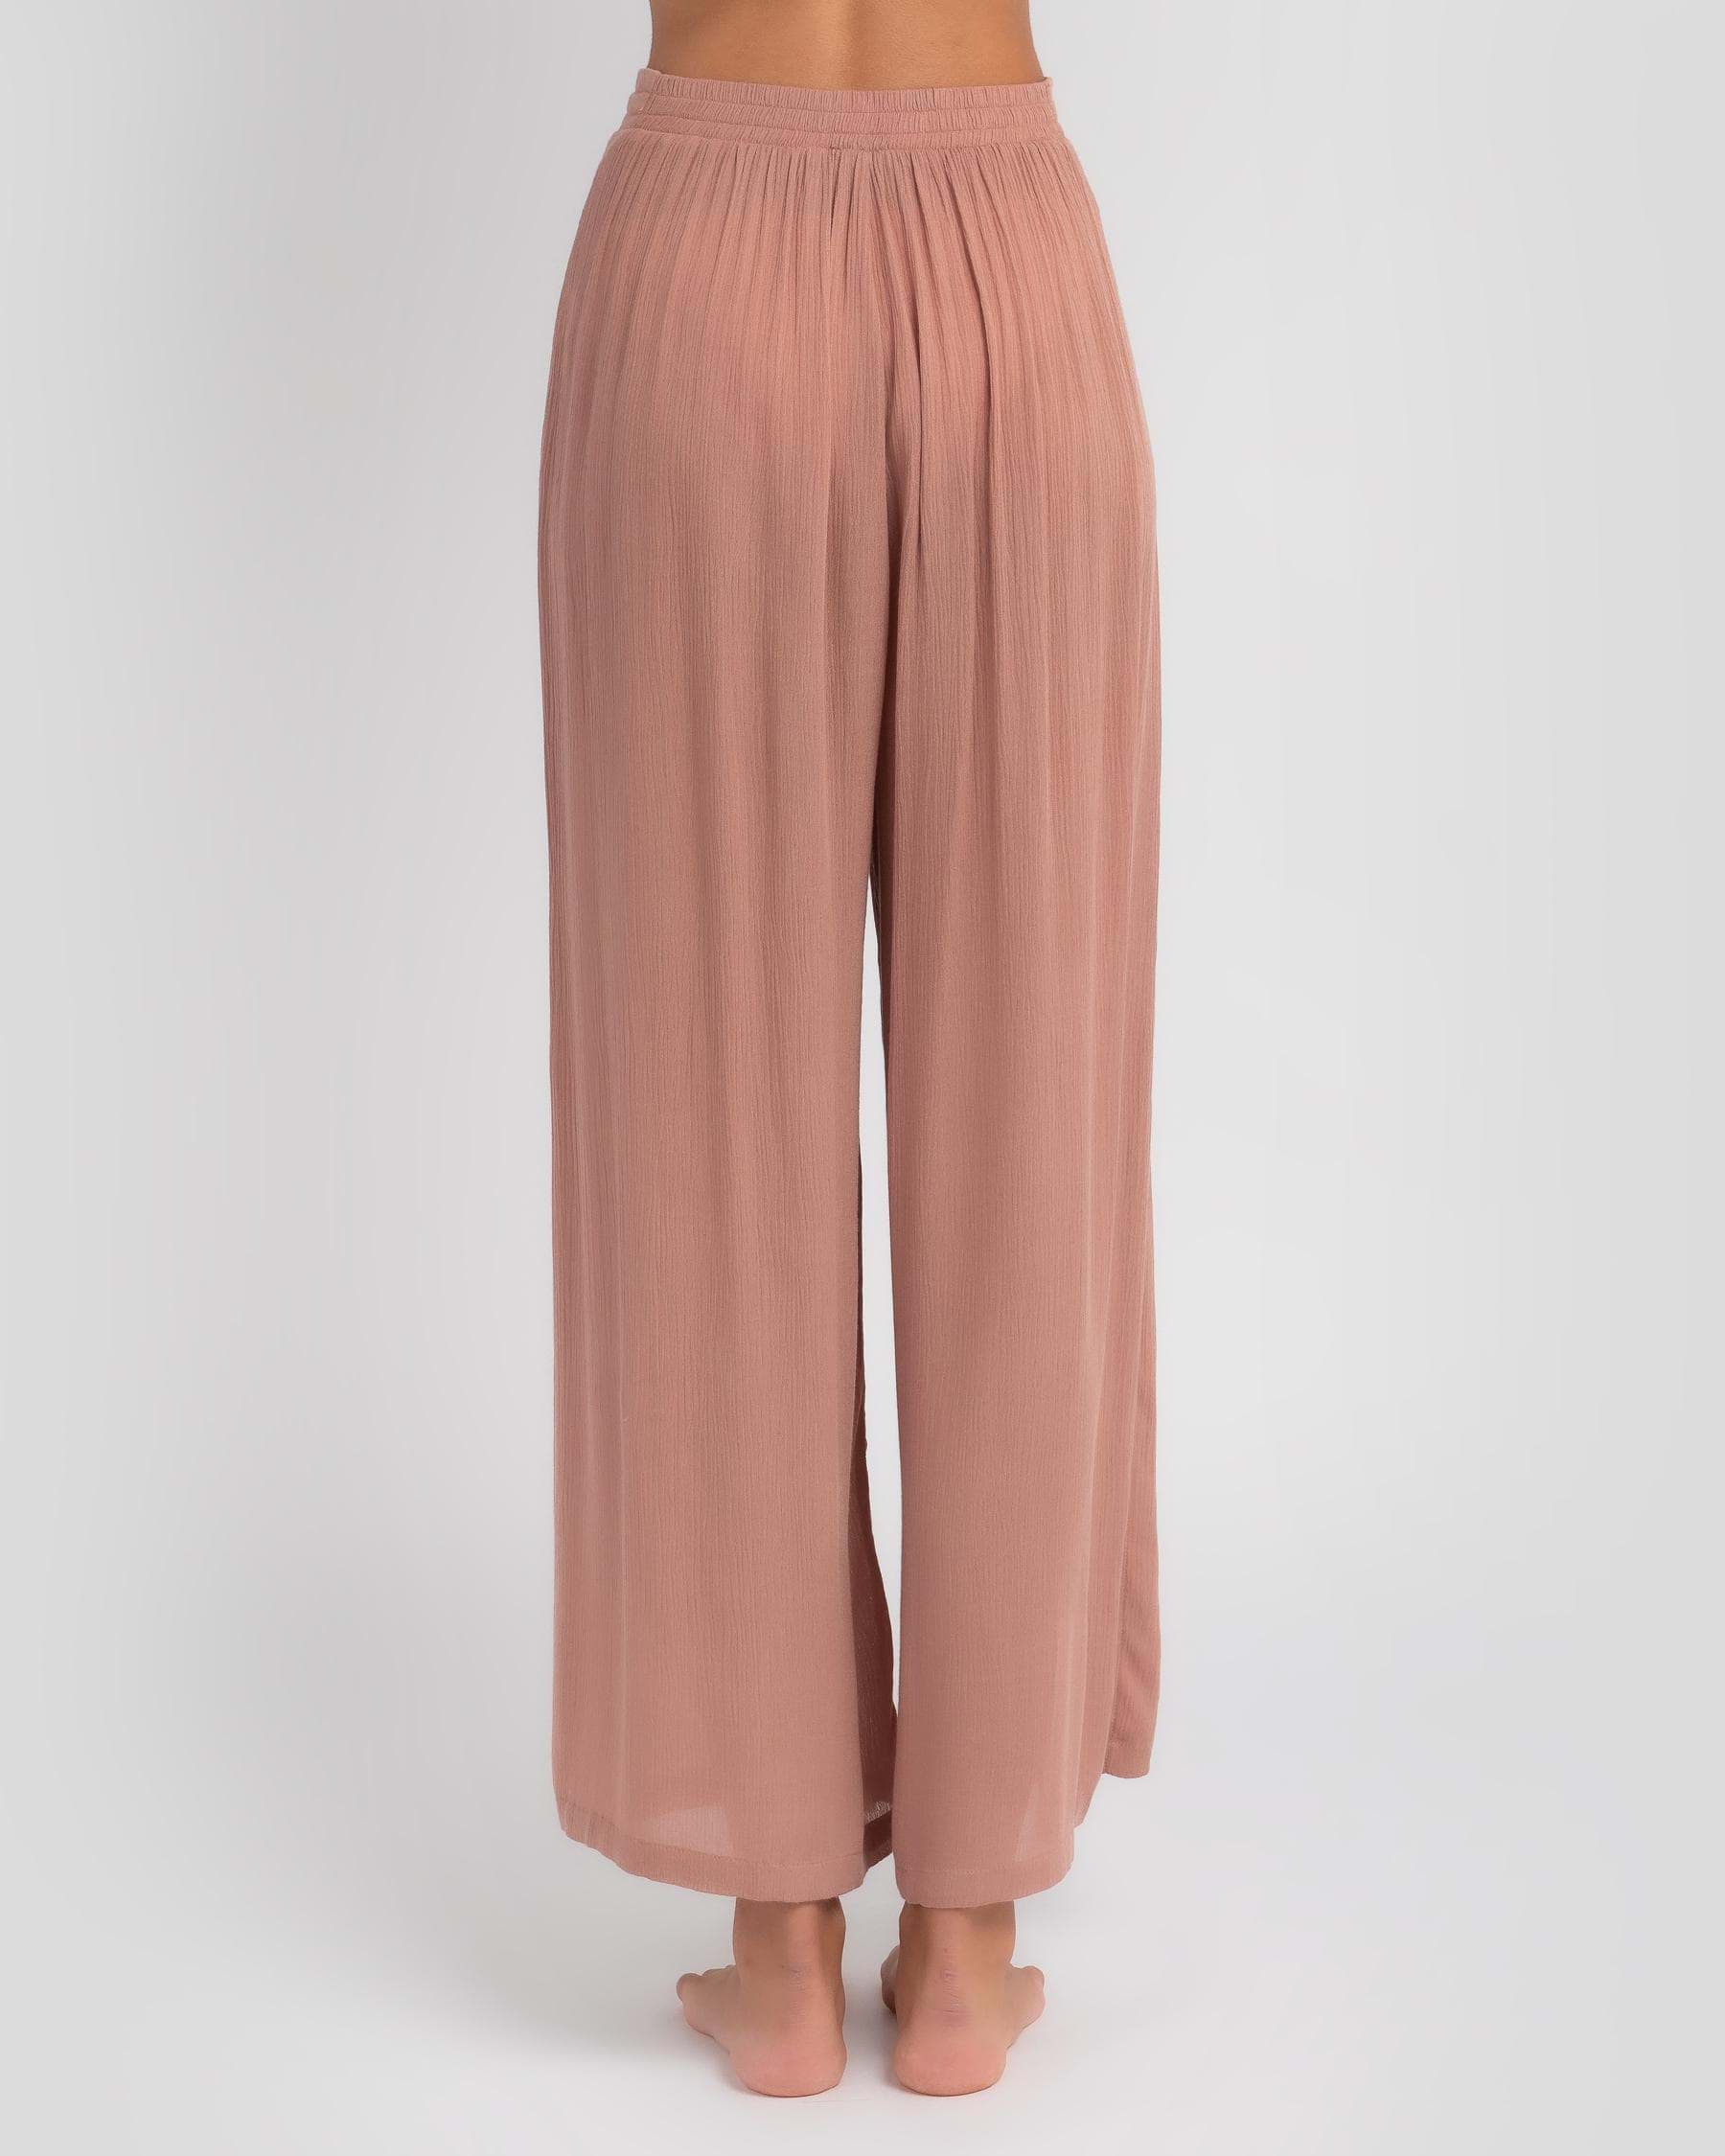 Ava And Ever Malibu Beach Pants In Milk Chocolate - Fast Shipping ...